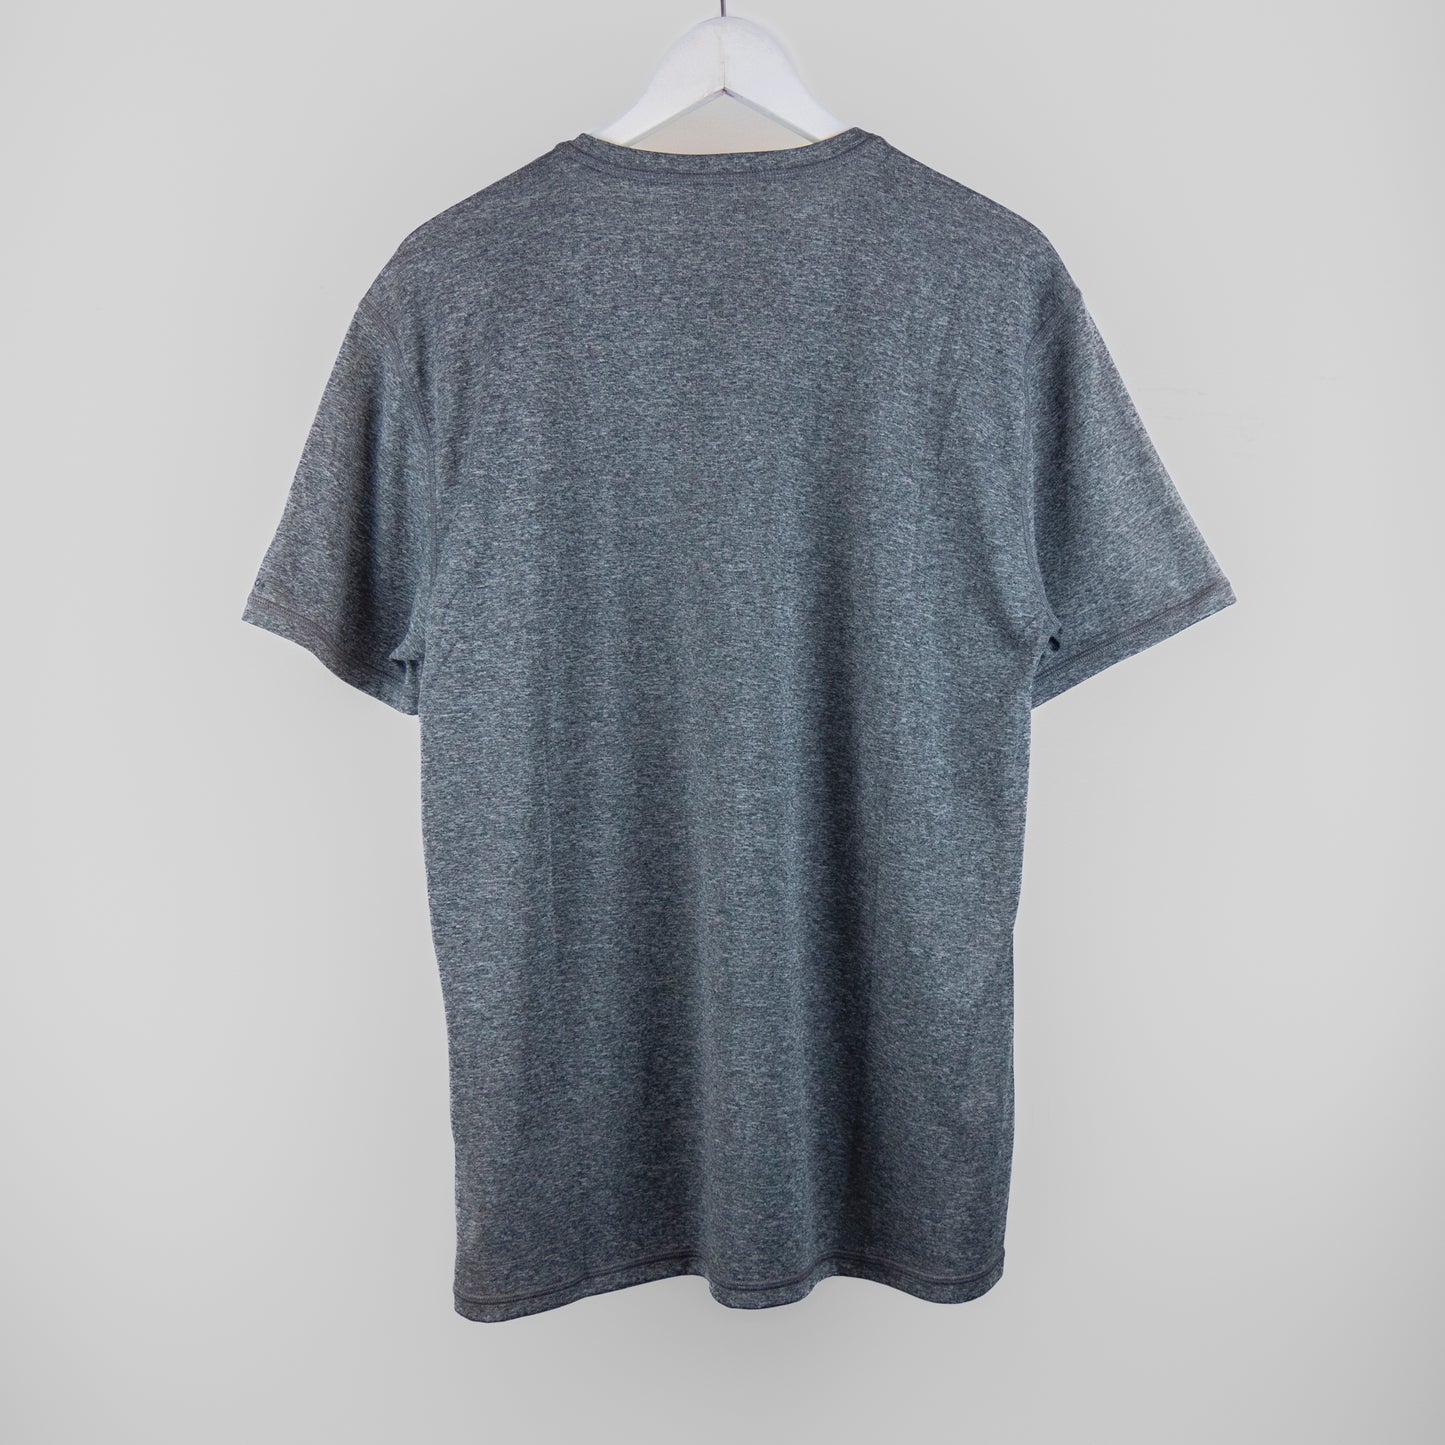 Calvin Klein - Light Weight Quick Dry Short Sleeve 40+ UPF Protection - Heather Grey